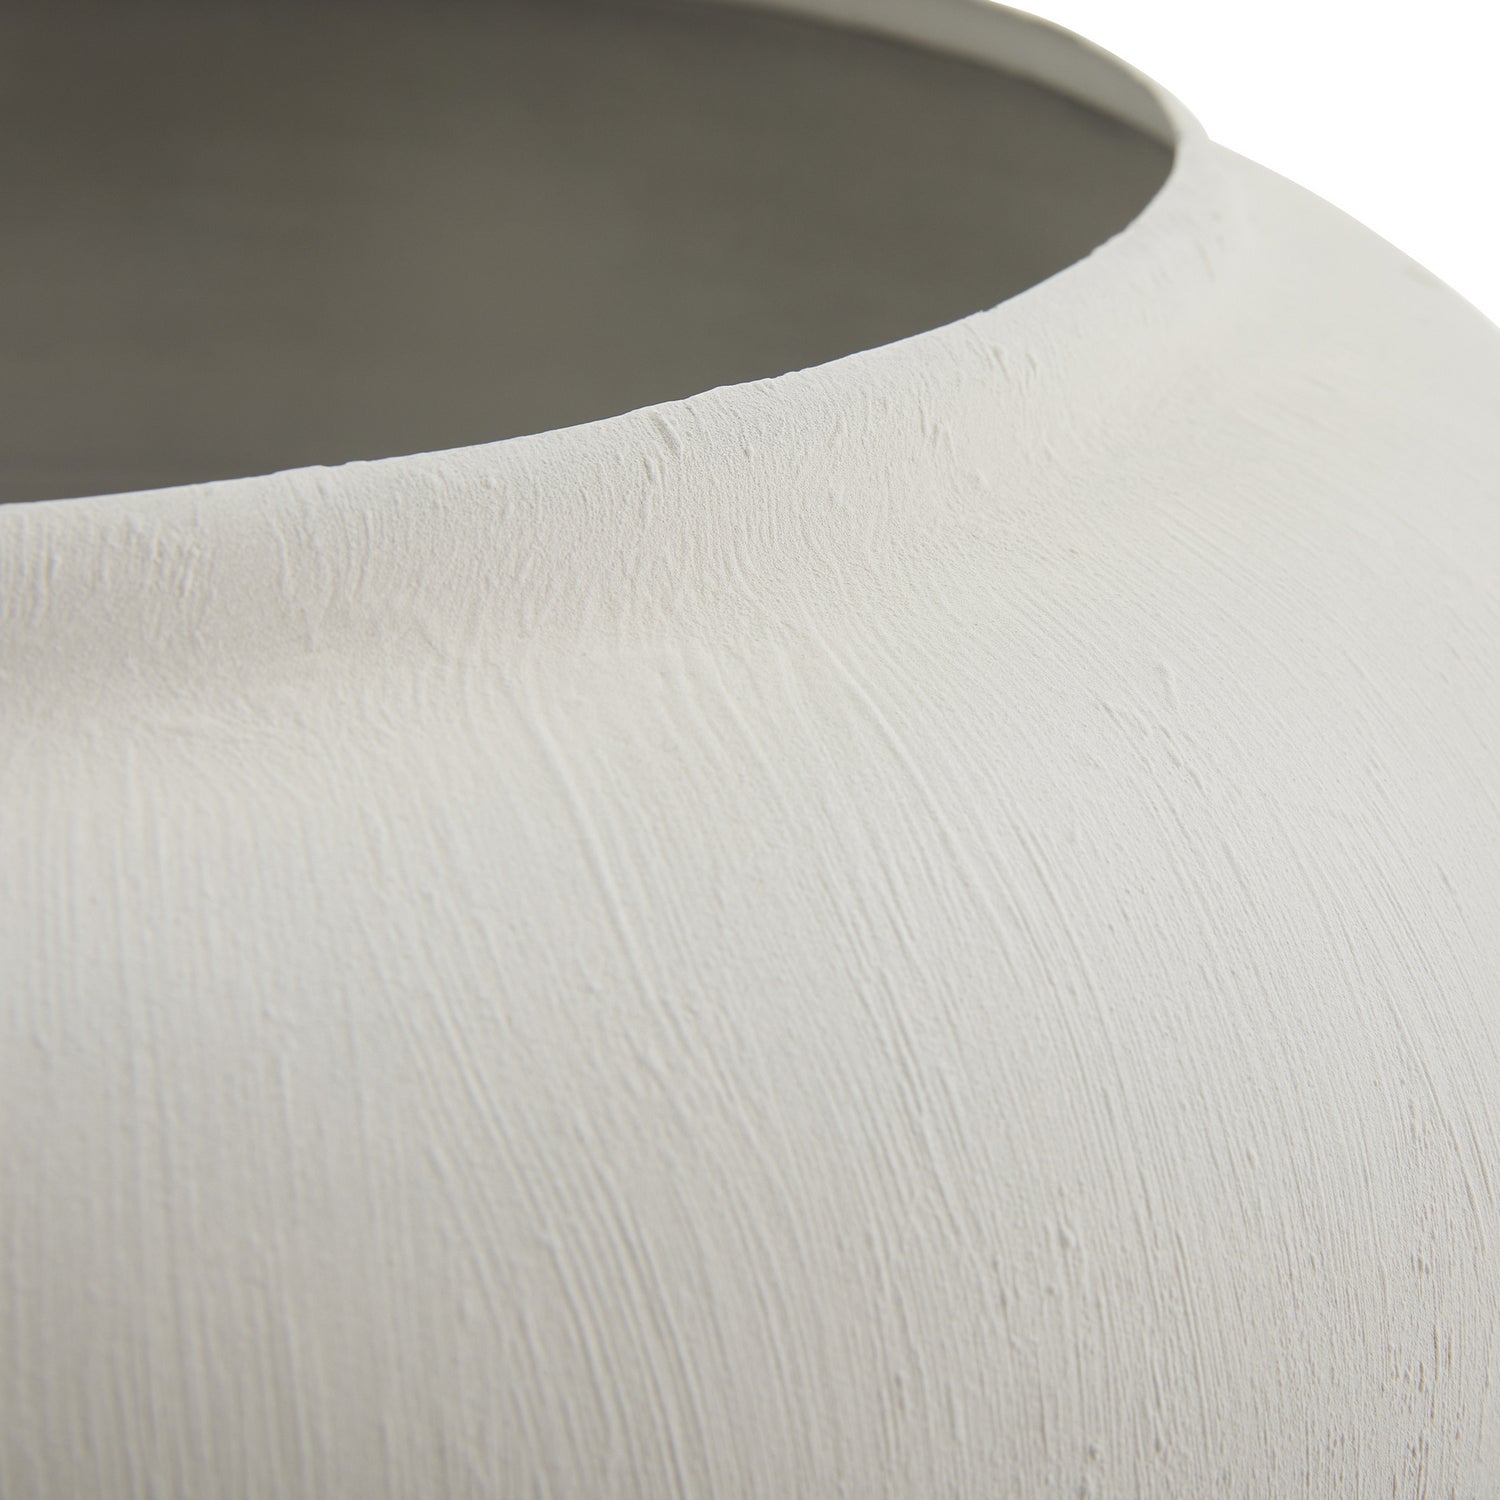 Floor Urn from the Marcello collection in Matte White finish